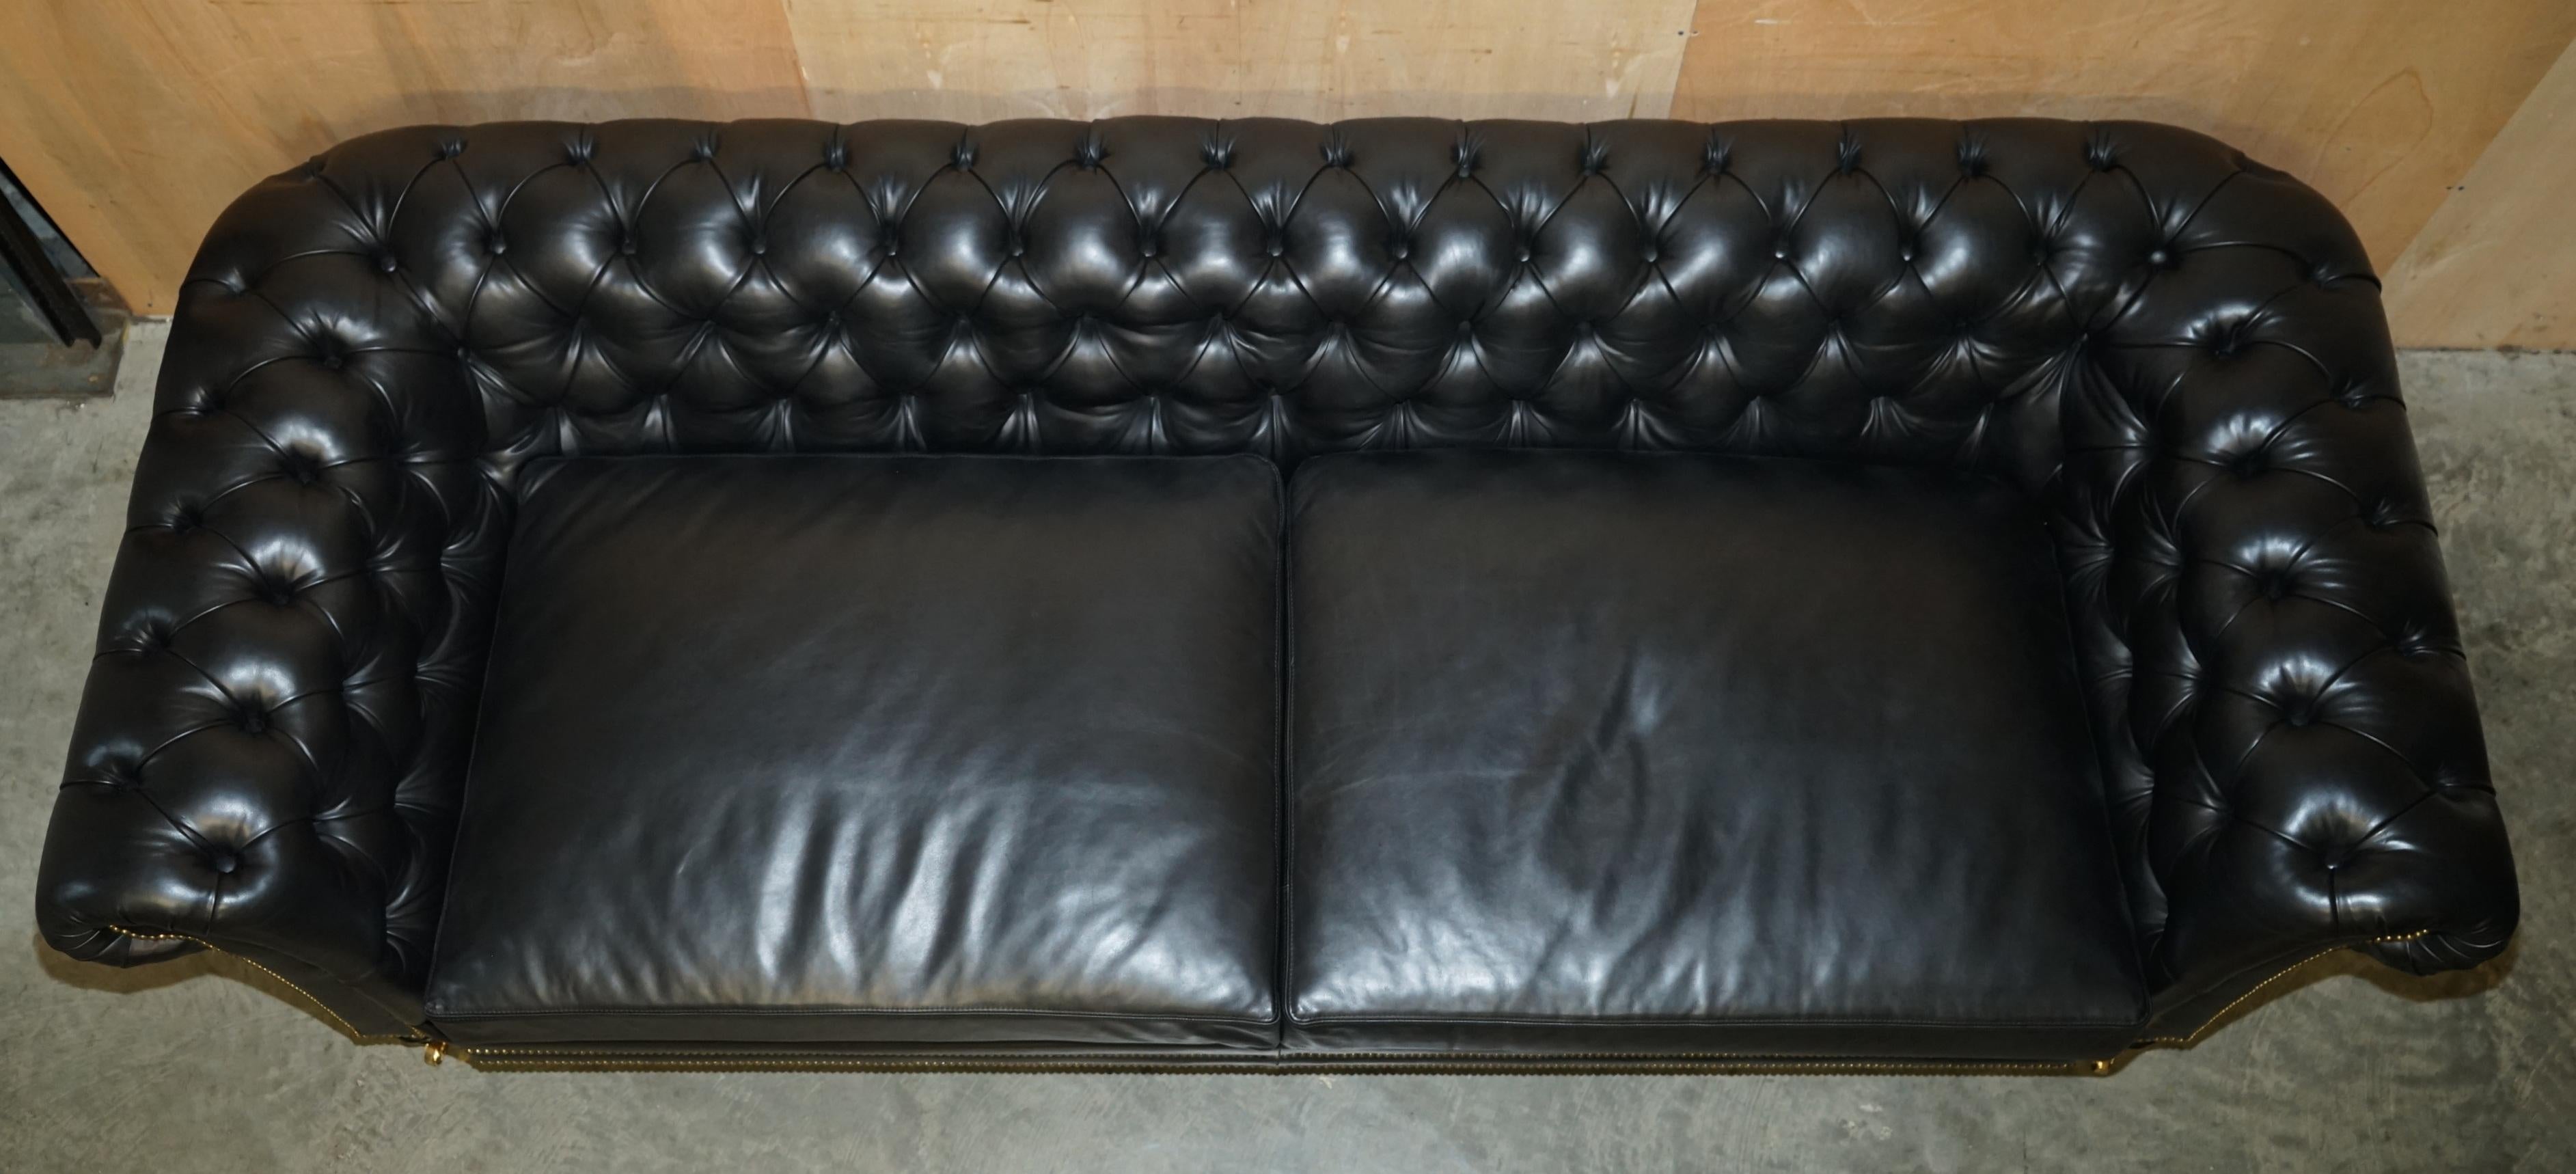 20th Century EXQUISITE PAIR OF RALPH LAUREN BROOK STREET BLACK LEATHER CHESTERFIELD SOFAs For Sale